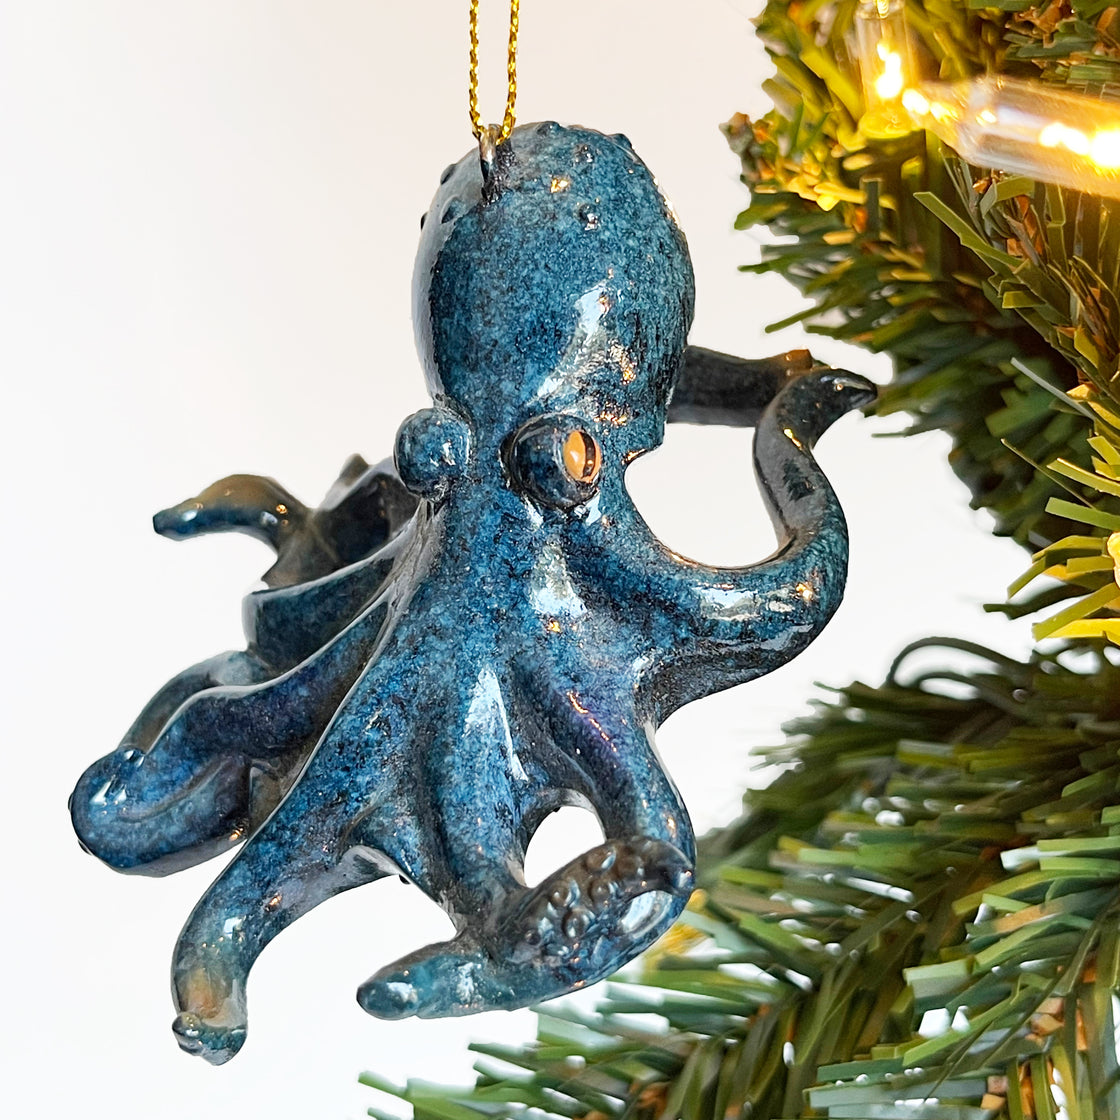 On a Christmas tree adorned with holiday lights the intricate bluish octopus design by rengora mirrors the lifelike appearance of an actual octopus